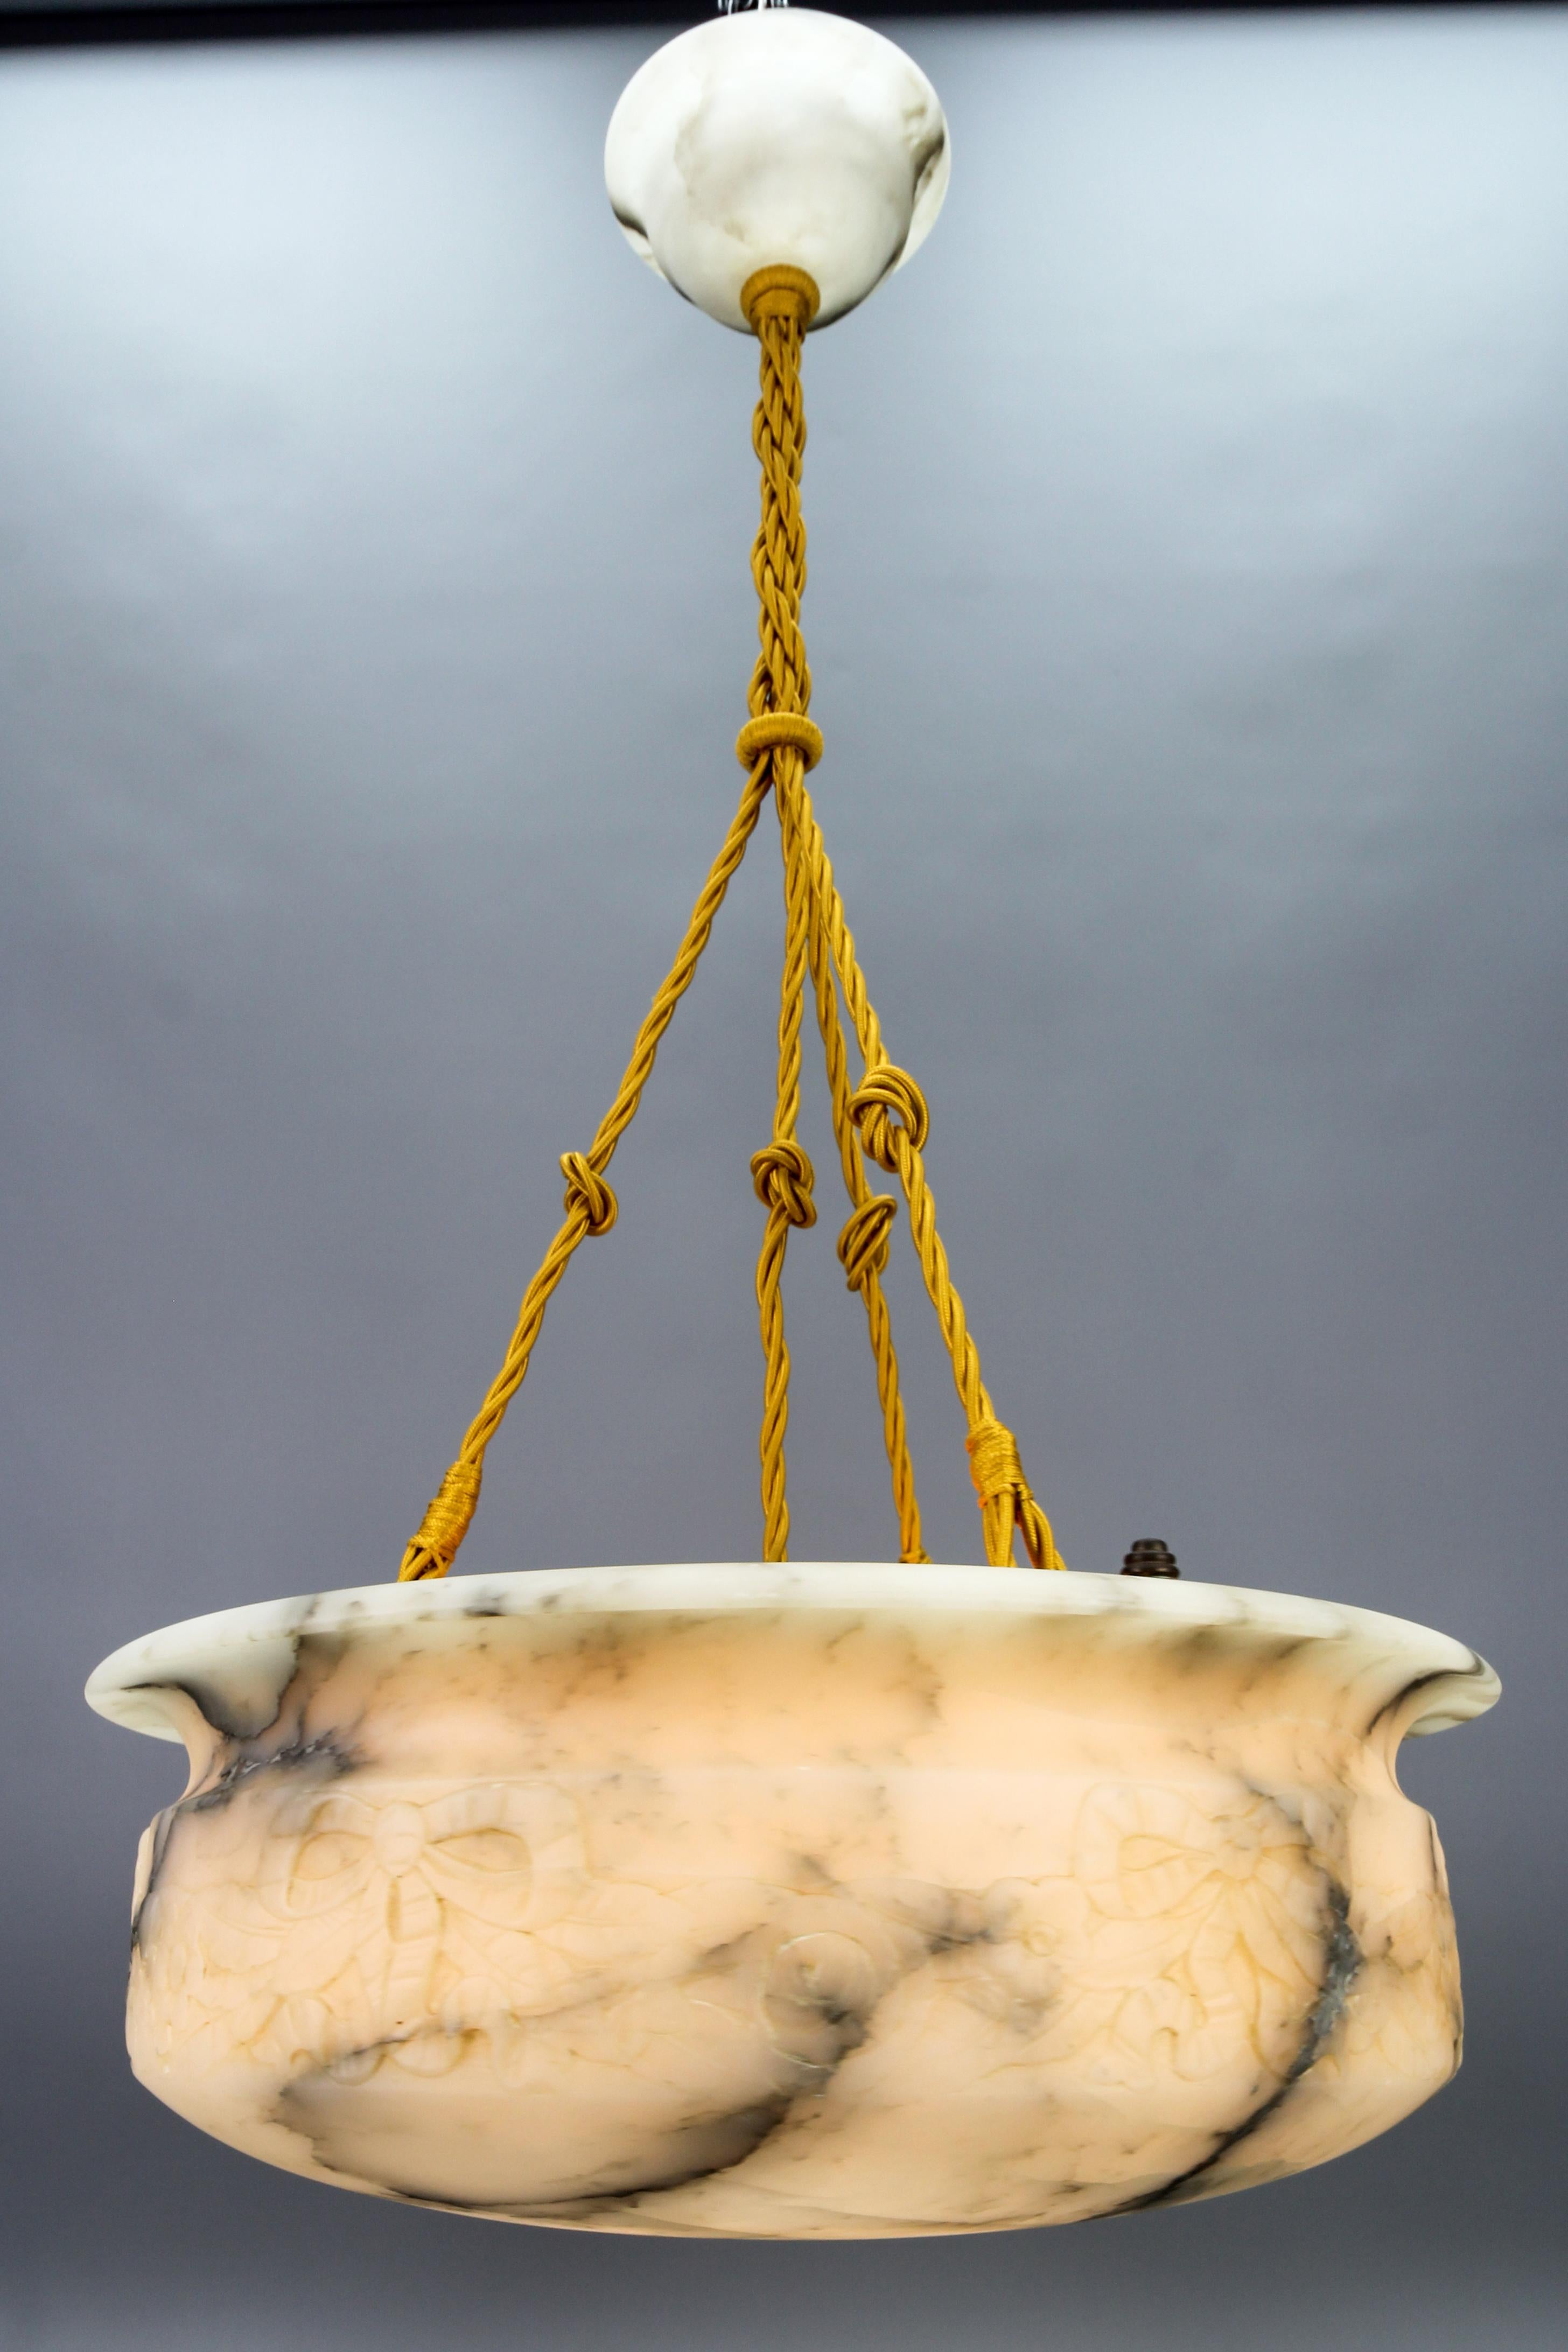 Art Deco White and Black Alabaster Pendant Light Fixture with Carved Flowers 
Gorgeous and large alabaster pendant ceiling light fixture from circa the 1930s. Beautifully veined and masterfully carved one-piece white alabaster bowl suspended by